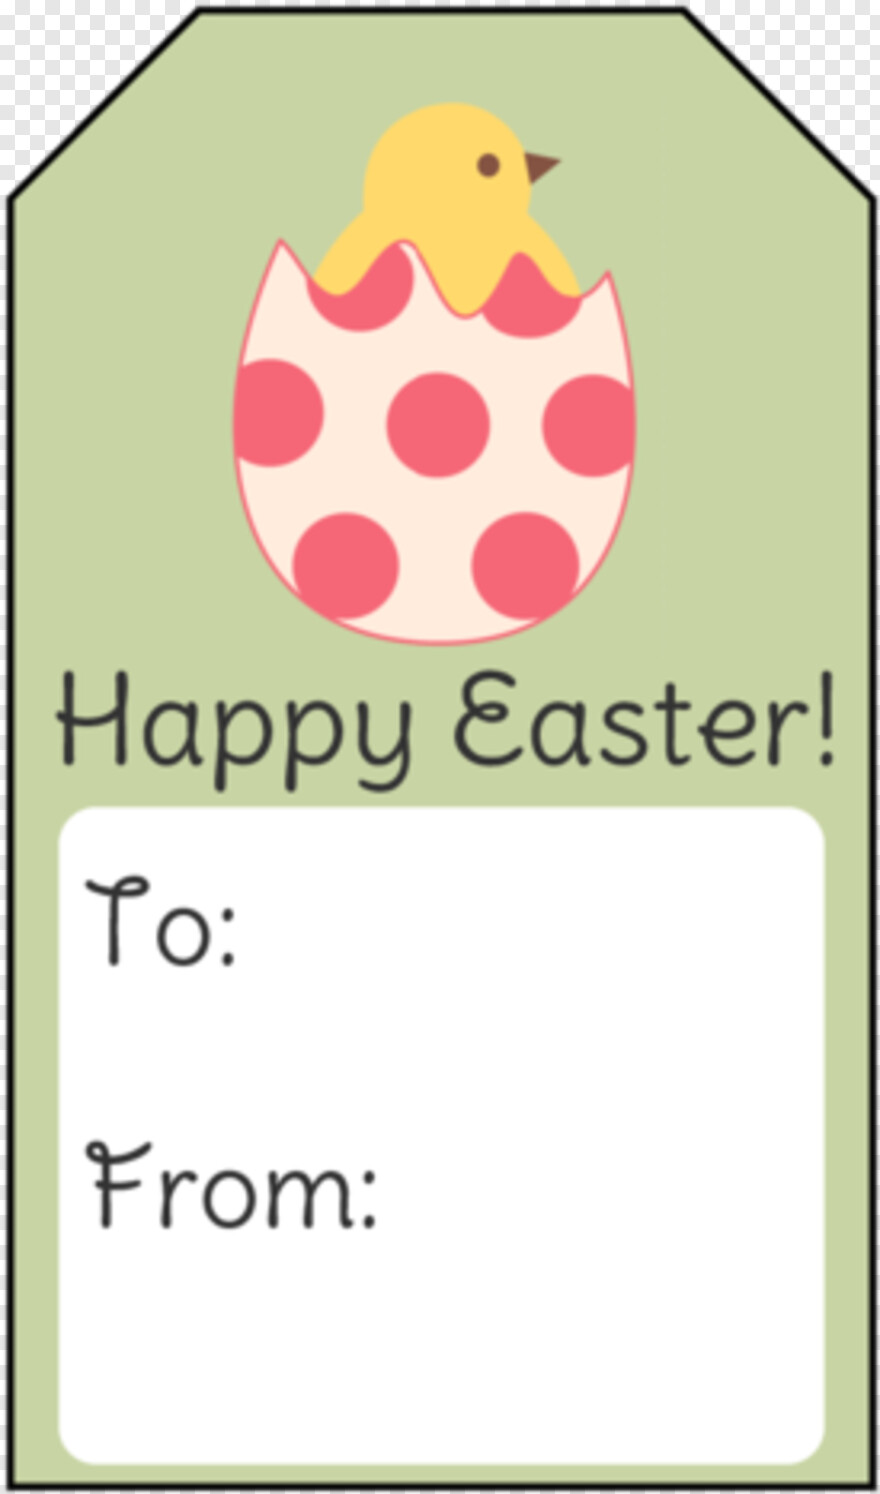 happy-easter # 378161